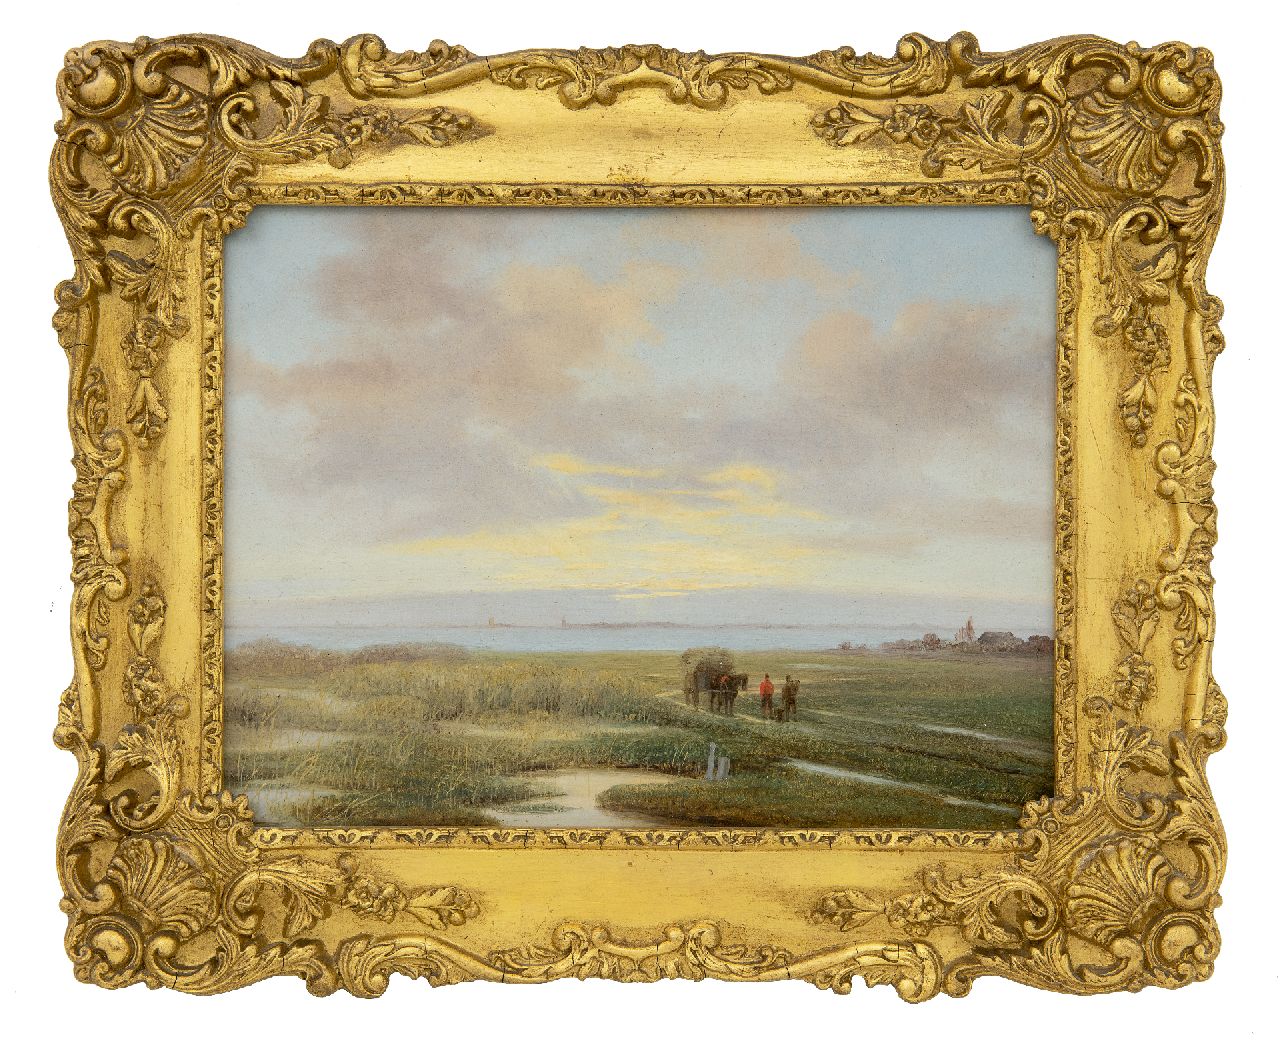 Roosenboom N.J.  | Nicolaas Johannes Roosenboom | Paintings offered for sale | An extensive landscape with land folk and a hay cart, oil on panel 20.5 x 27.0 cm, signed l.r.